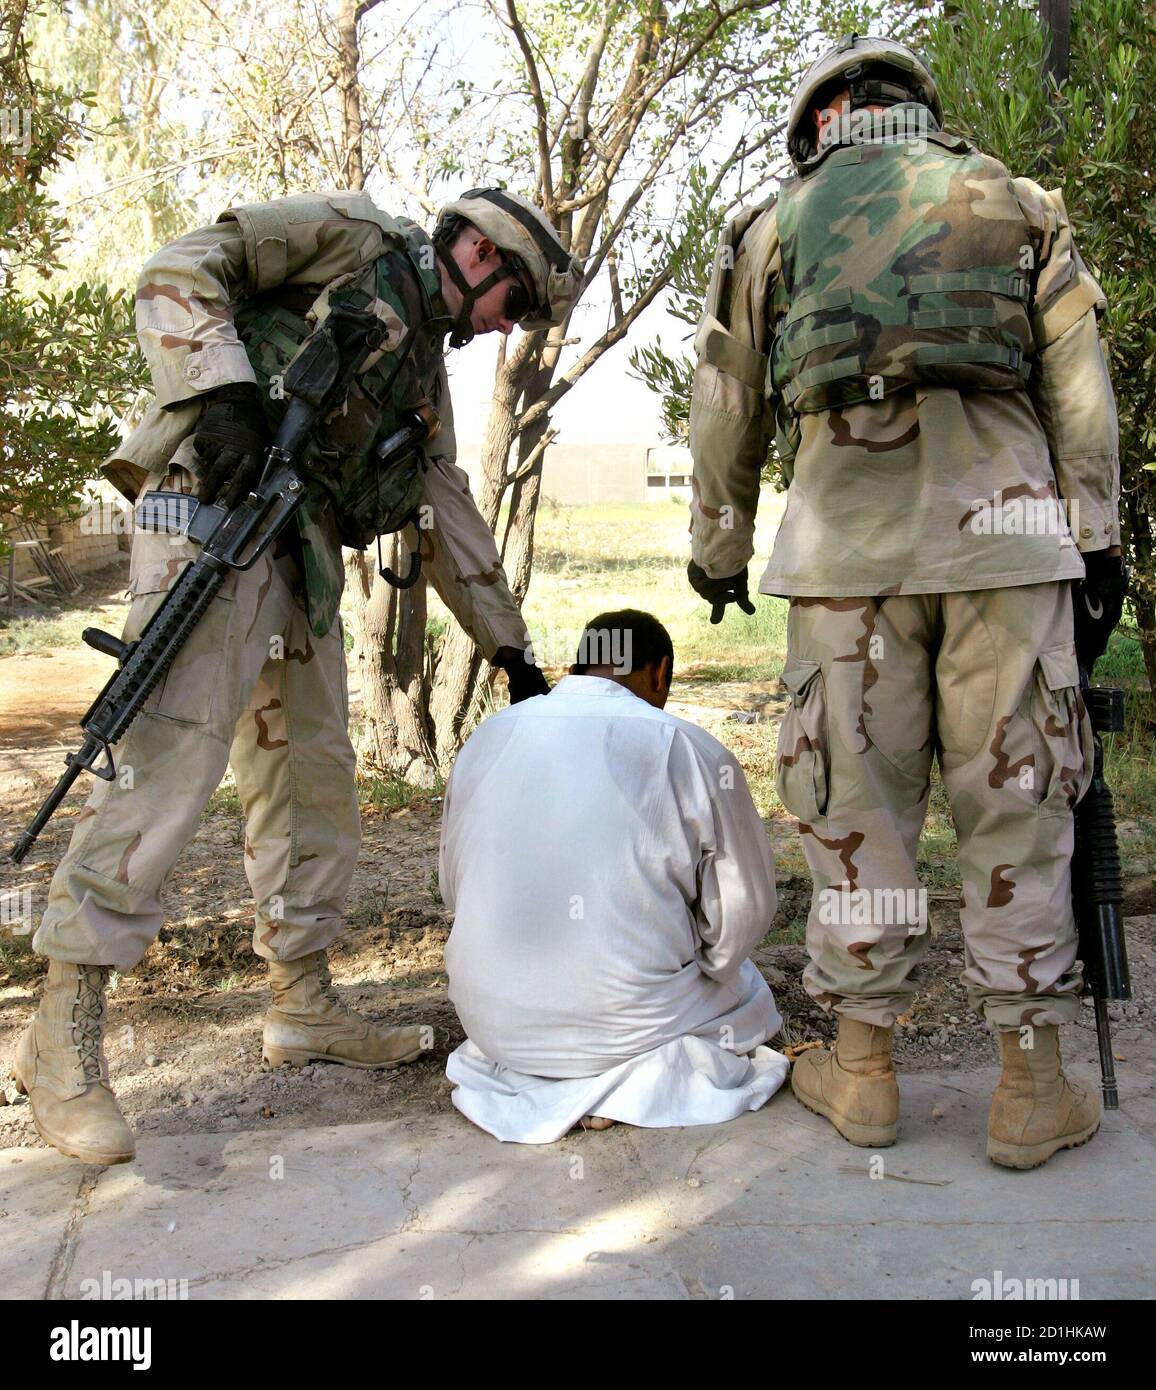 Two U.S. soldiers of the 3rd battalion, 7th Infantry, 4th Brigade, 3rd Infantry Division from Ft Benning, Georgia guard a detained suspect during a raid searching for illegal weapons inside his house in Baghdad August 3, 2005. Fourteen Marines were killed in a roadside bomb blast in western Iraq on Wednesday, the U.S. military said, in one of the single deadliest attacks against U.S. forces since the beginning of the war. REUTERS/Andrea Comas  ACO/TY Stock Photo